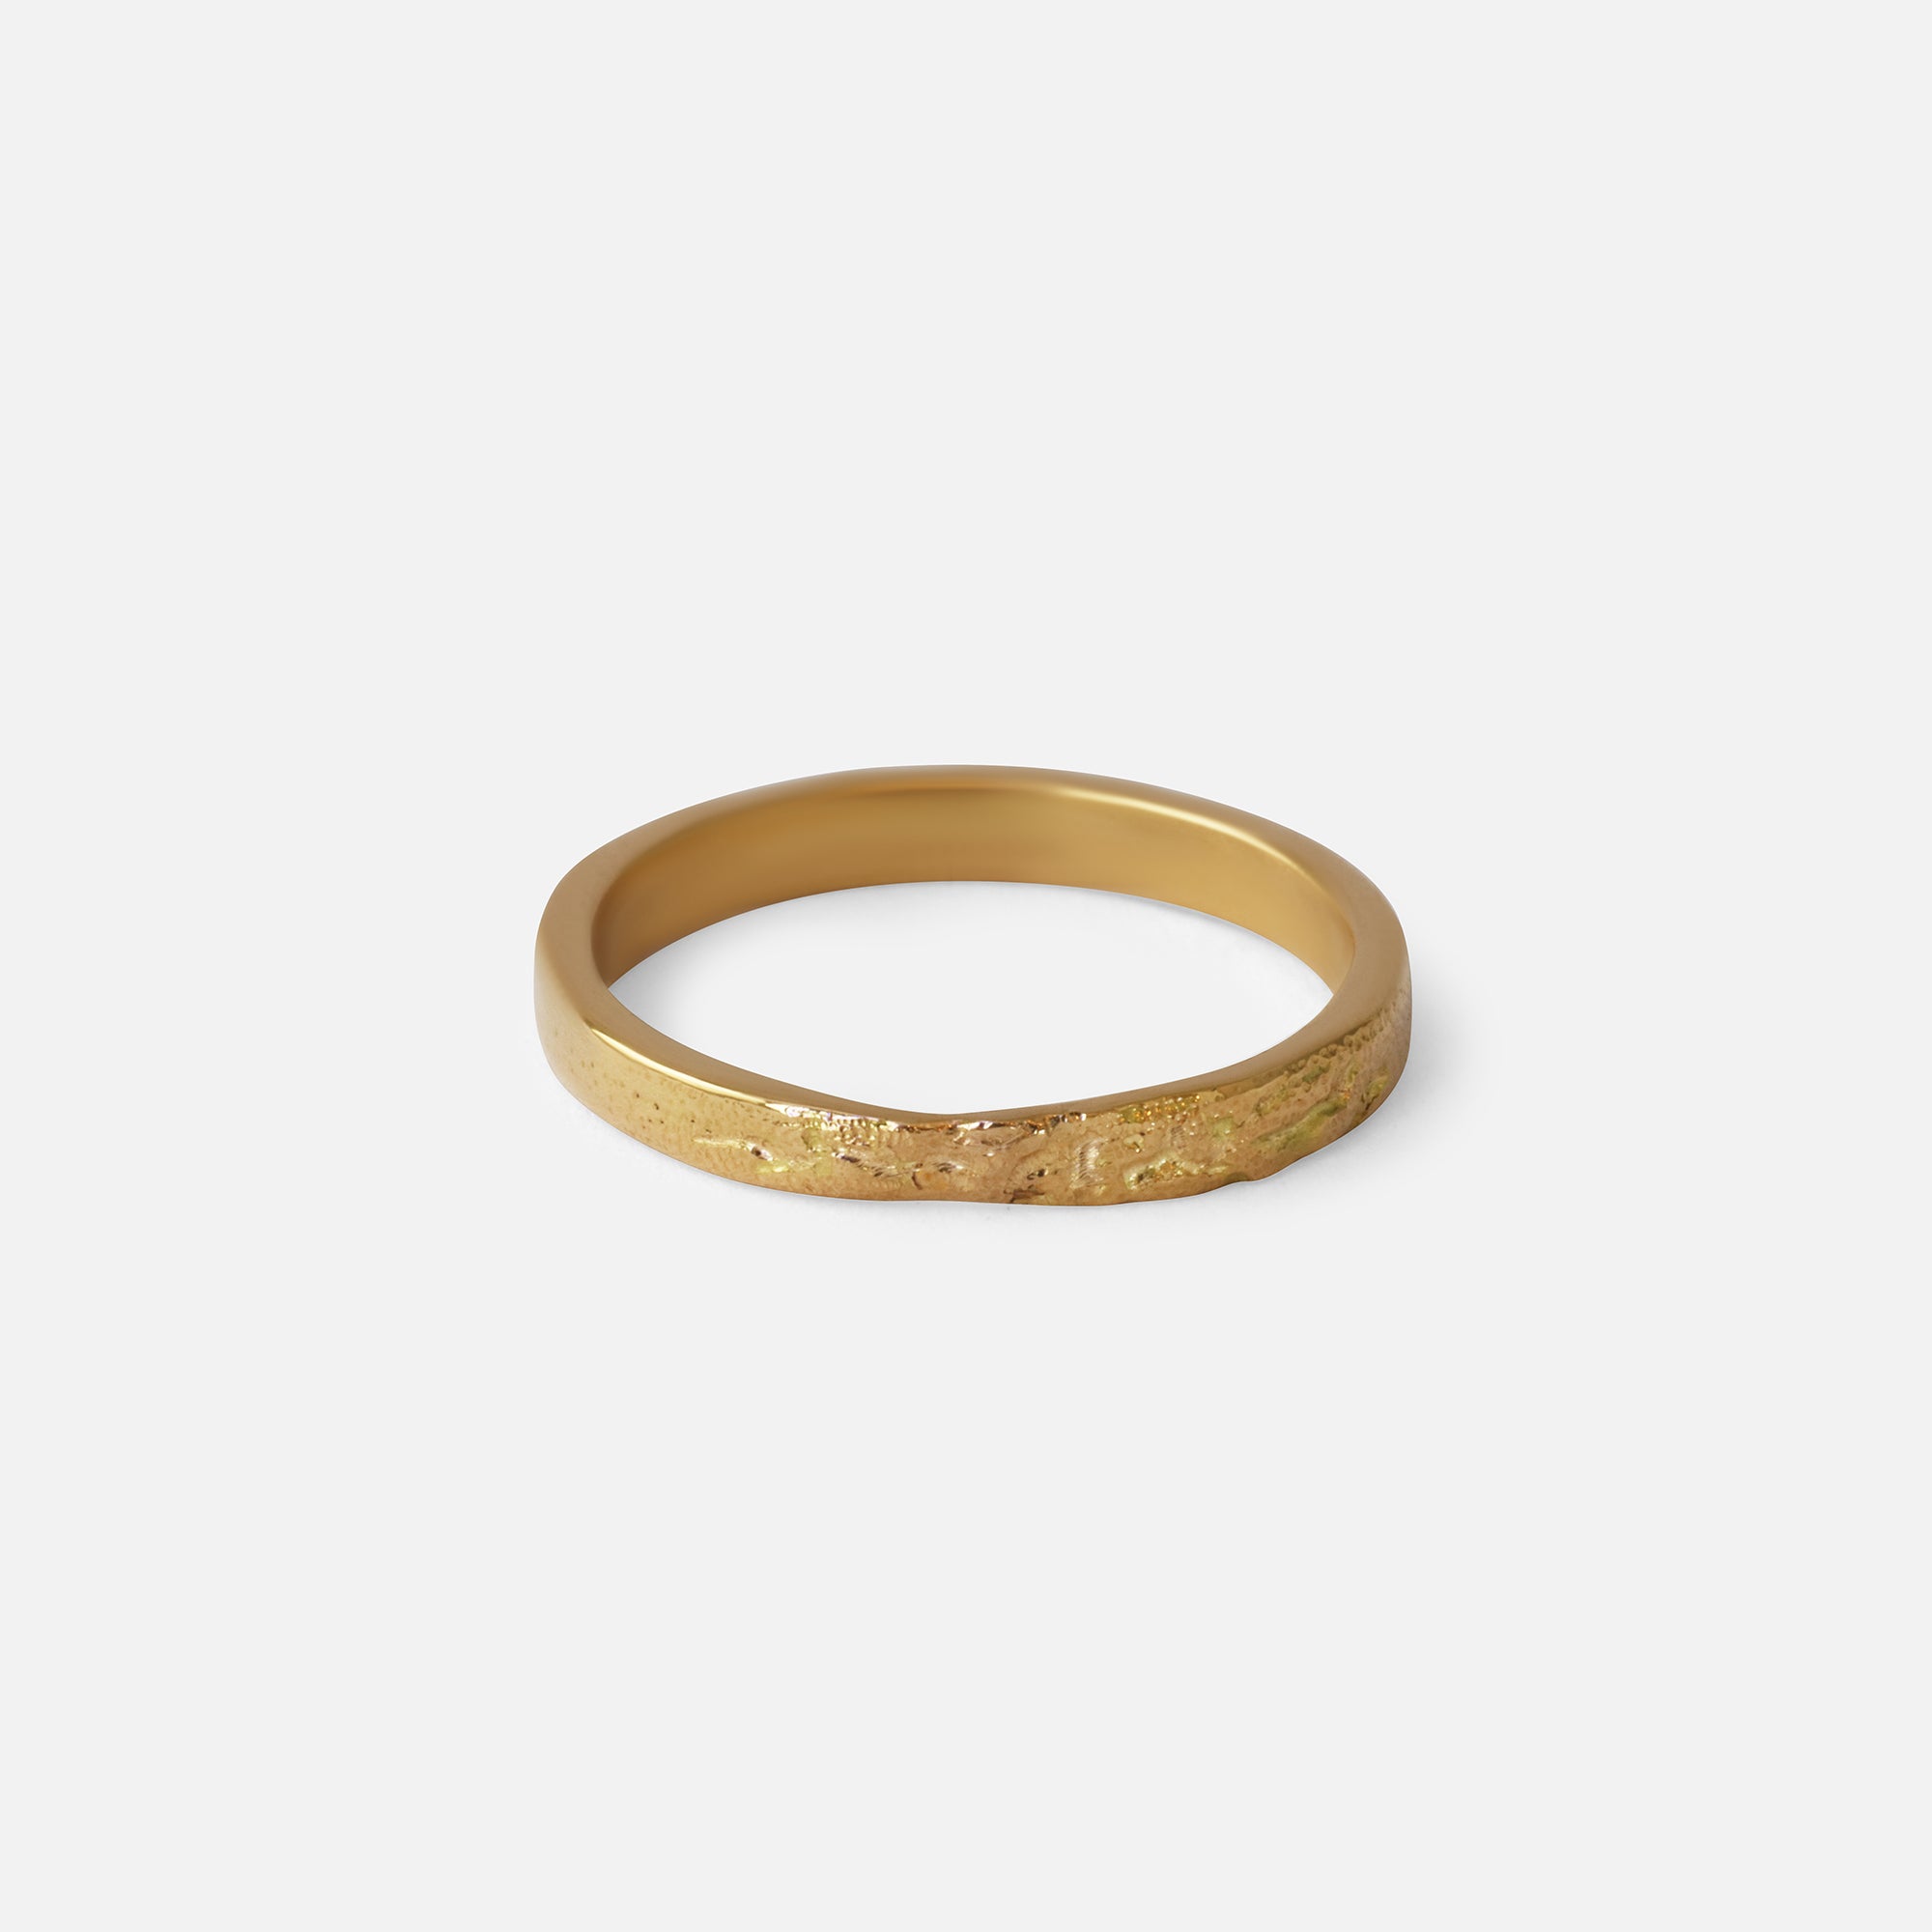 Stippled Stack Band By Young Sun Song